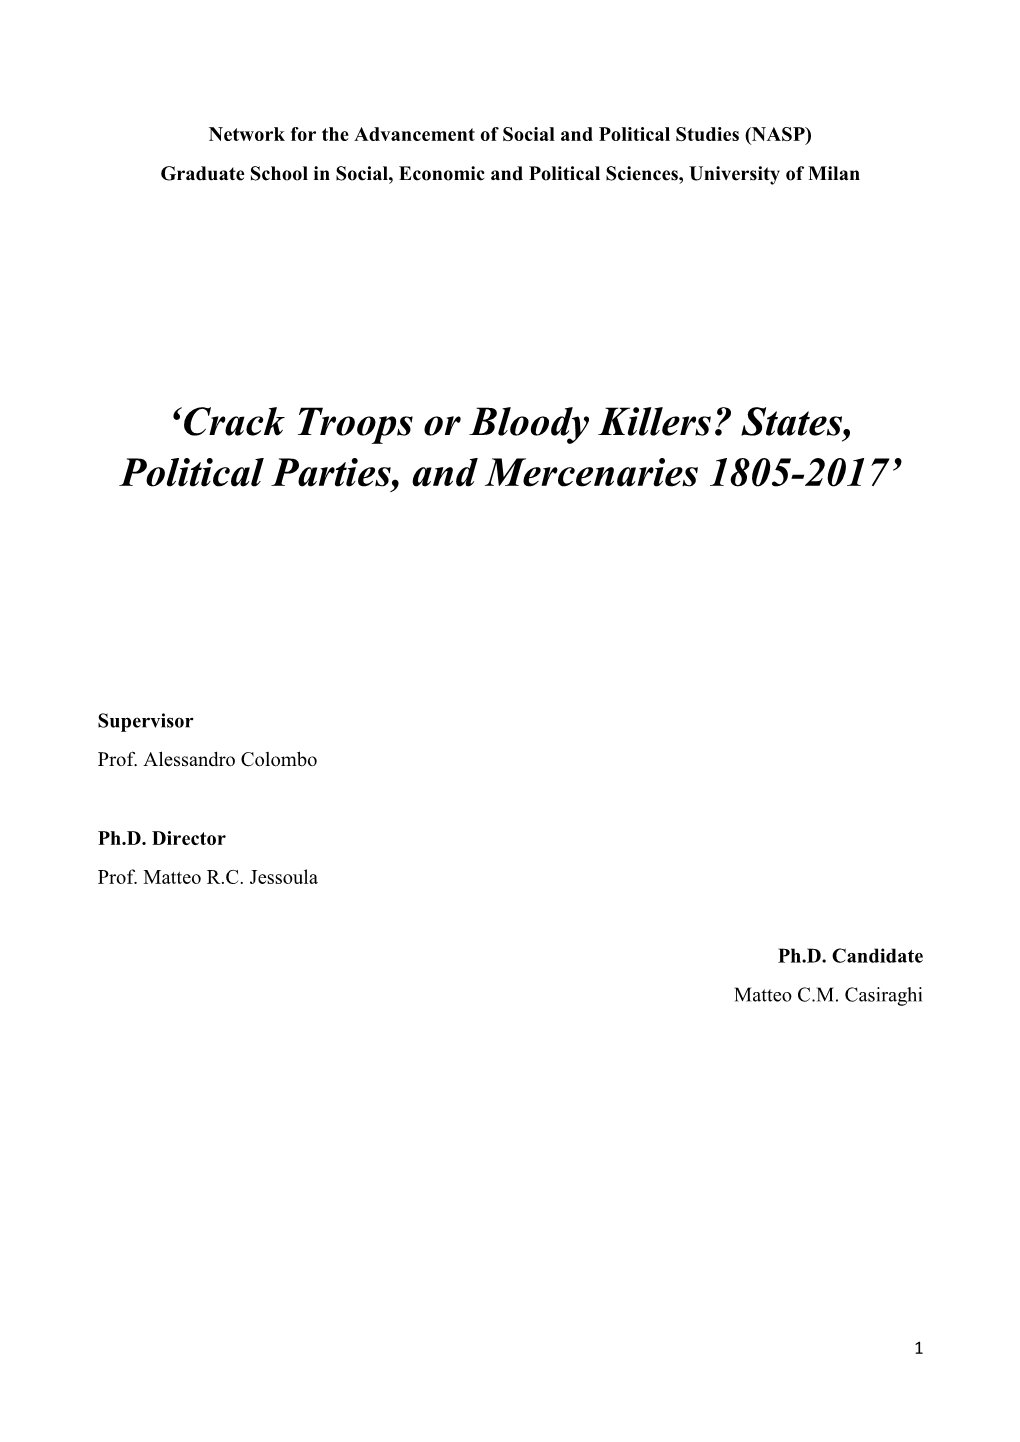 Crack Troops Or Bloody Killers? States, Political Parties, and Mercenaries 1805-2017’